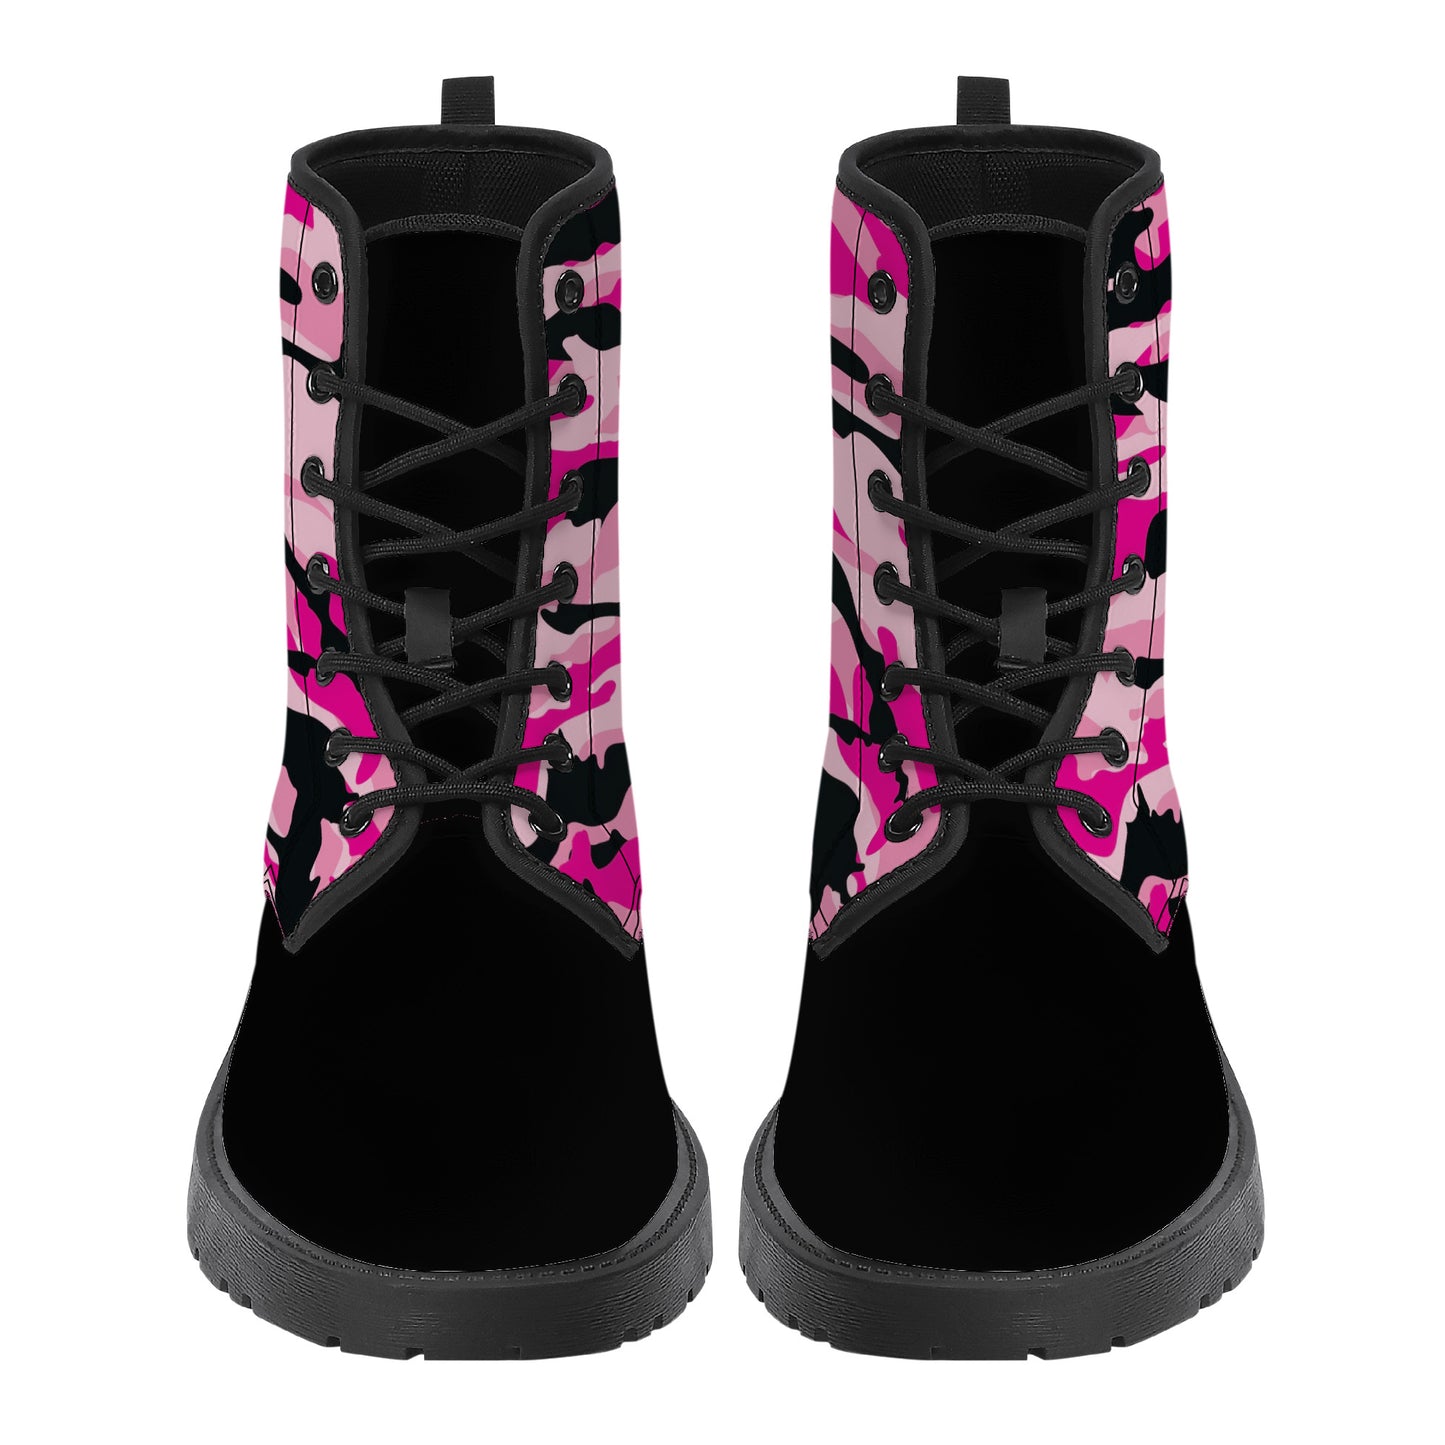 Unisex - Synthetic Leather Boots - Pink Camoflauge